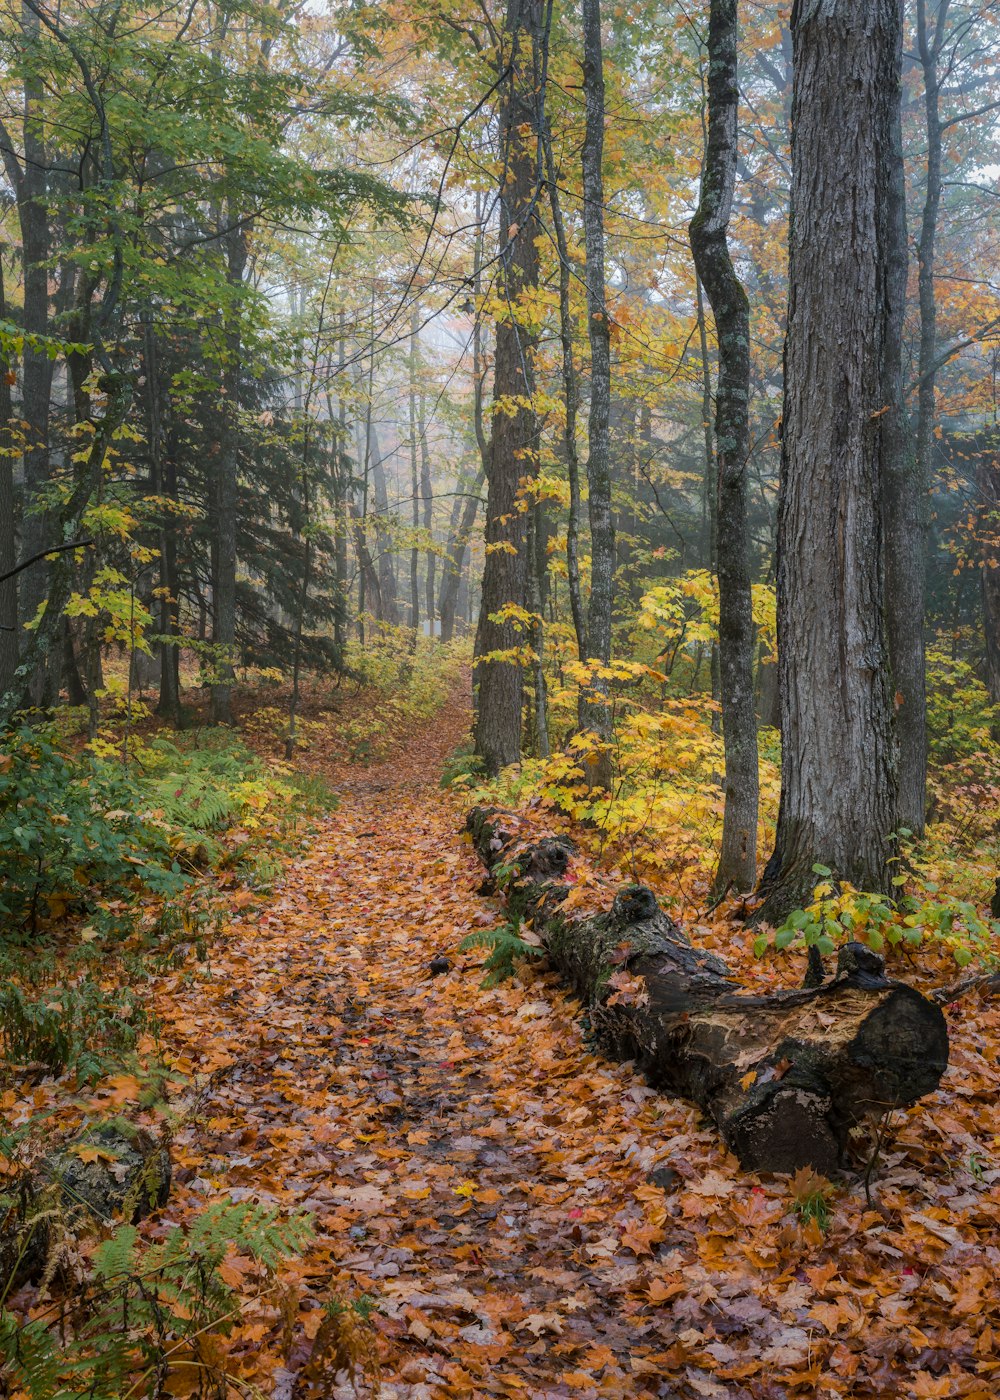 a path in the woods with fallen leaves on the ground